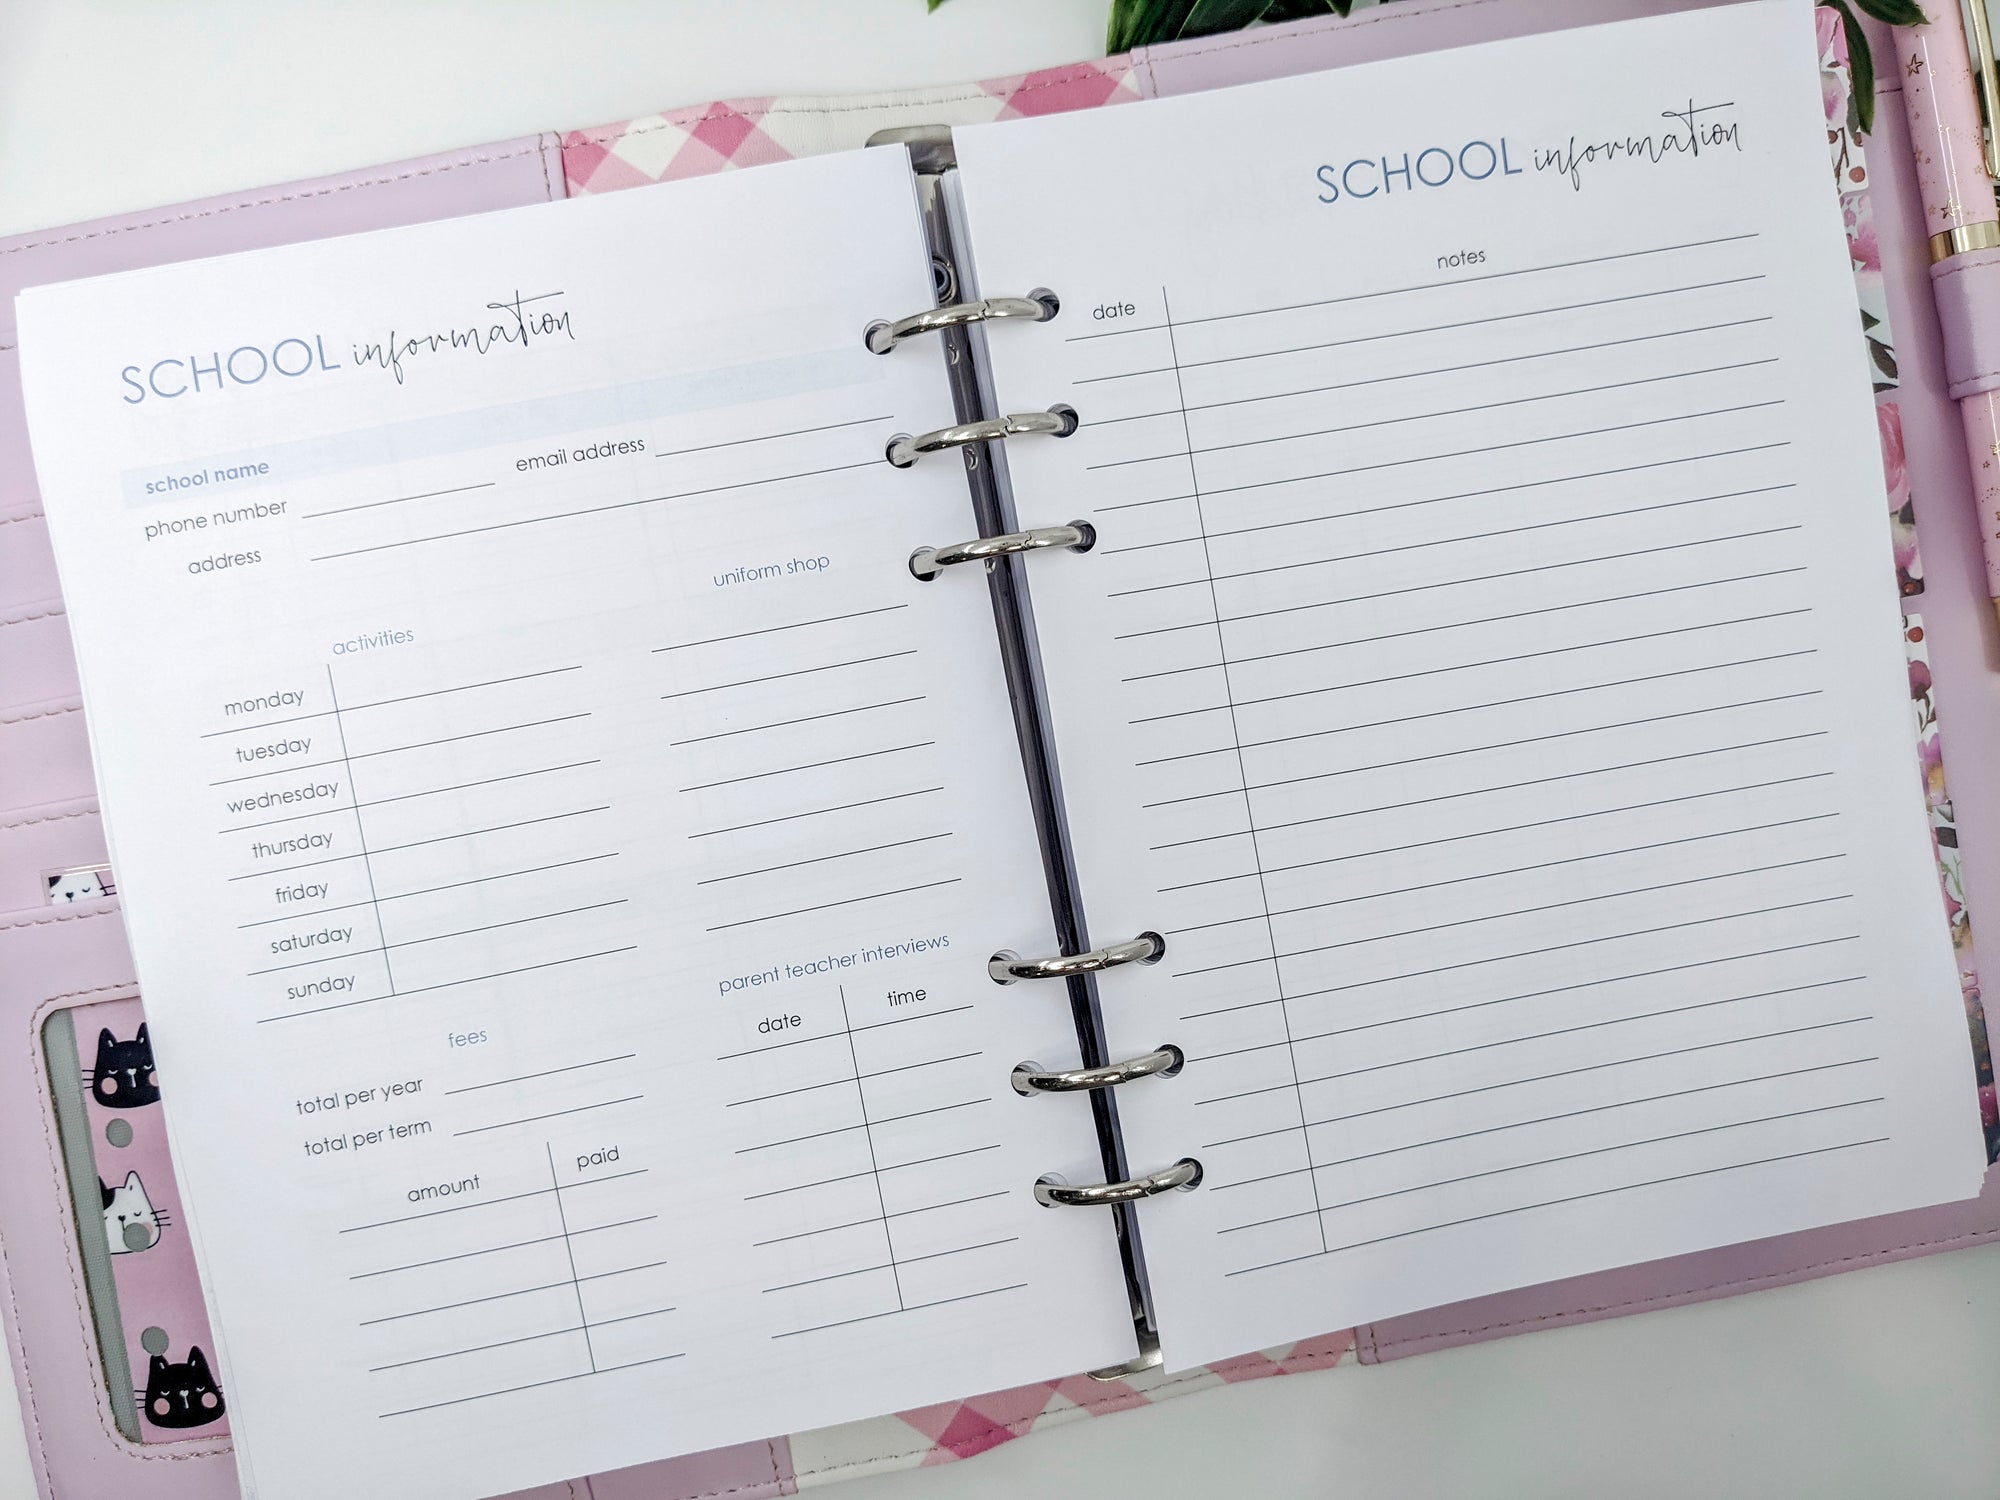 A5 School information planner refills for Planner Peace plannres. Also fits Kikki.K, Filofax and other A5 diaries, planners and organisers